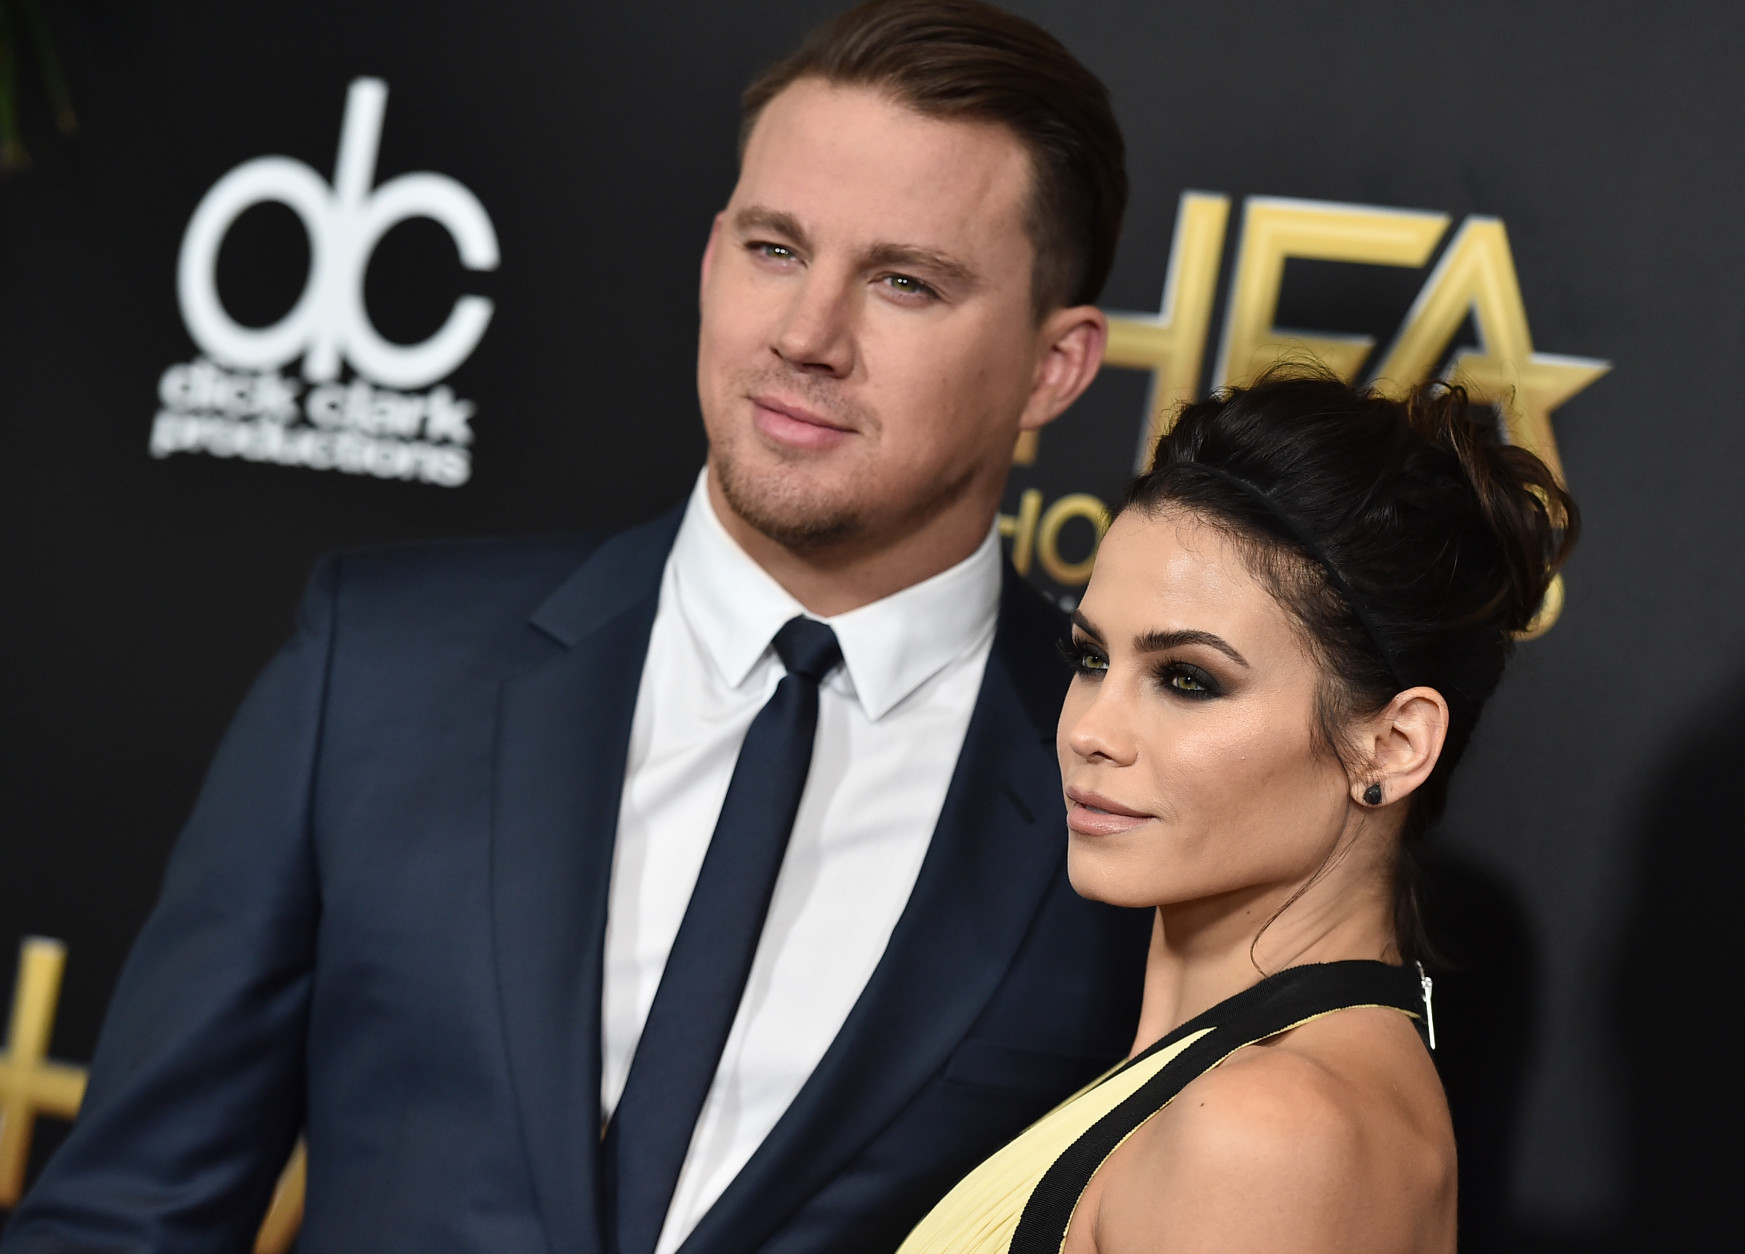 Channing Tatum, left, and Jenna Dewan Tatum arrive at the Hollywood Film Awards at the Beverly Hilton Hotel on Sunday, Nov. 1, 2015, in Beverly Hills, Calif. (Photo by Jordan Strauss/Invision/AP)